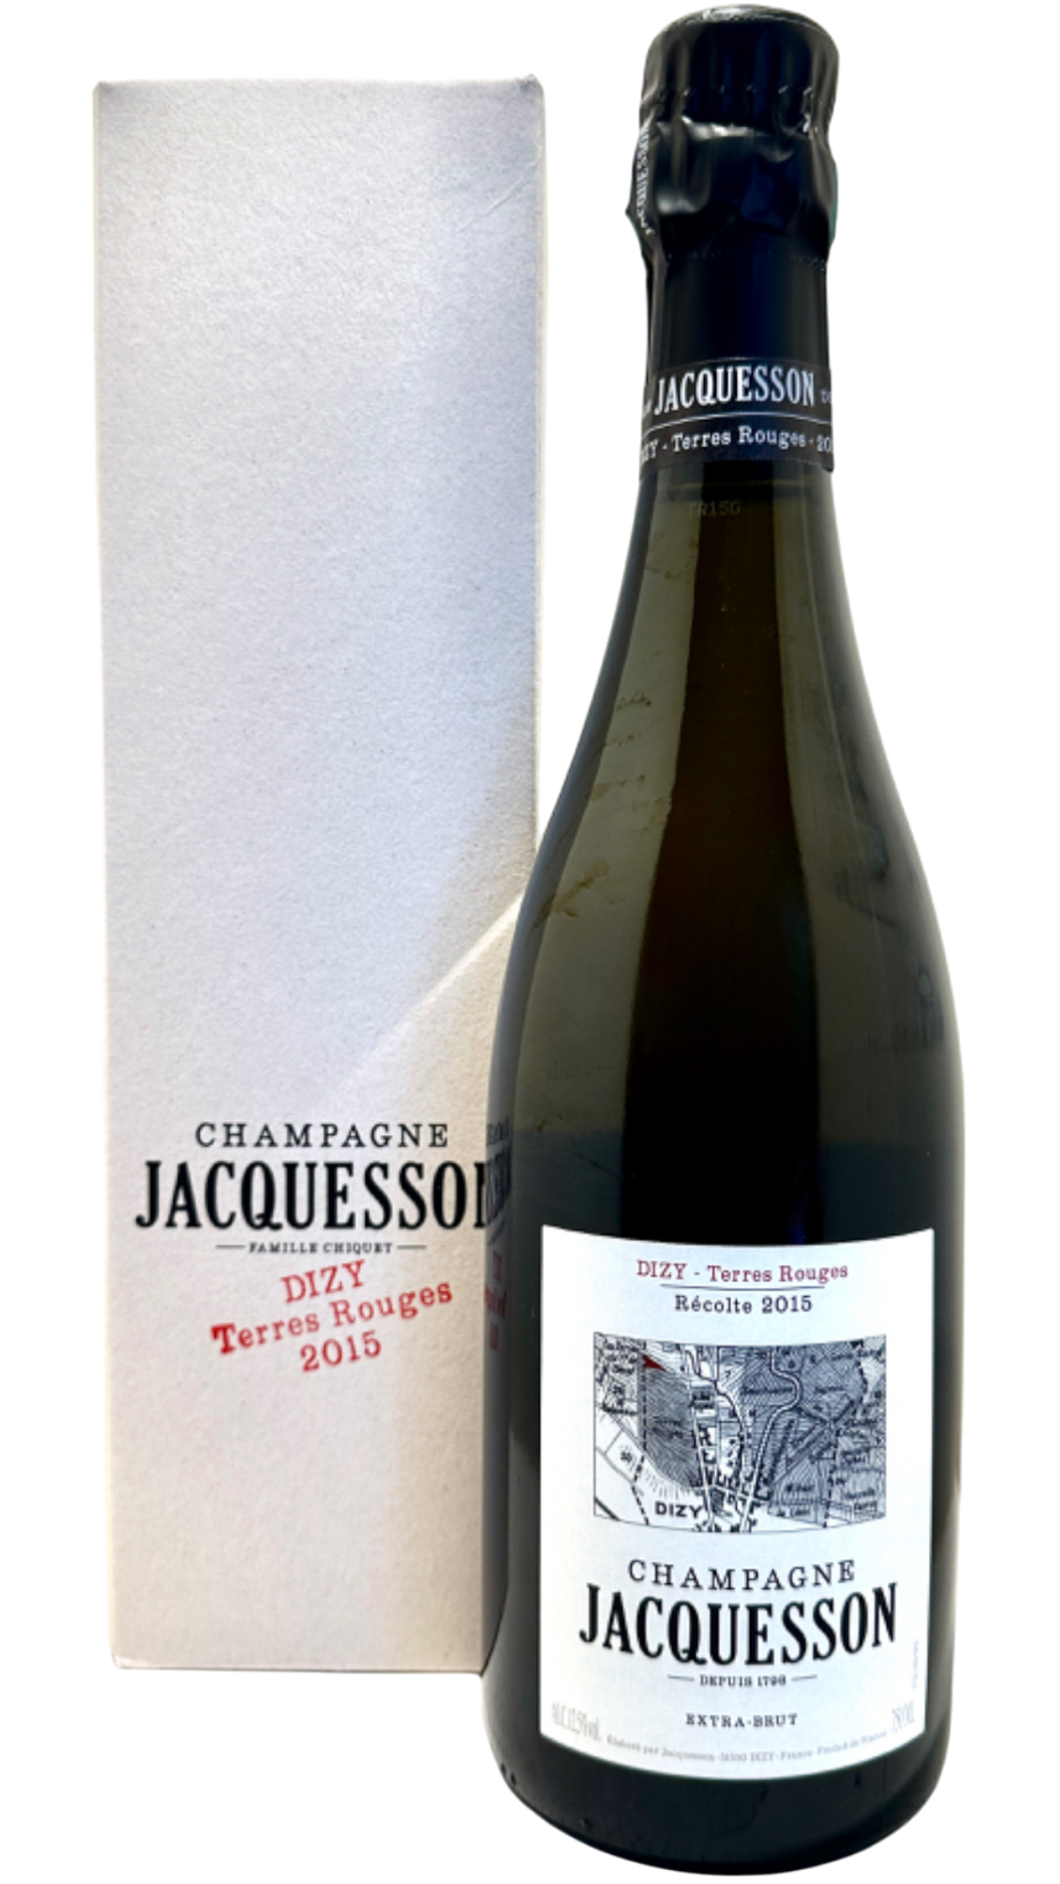 Disy Terres rouges Champagne Jacqueson 2015